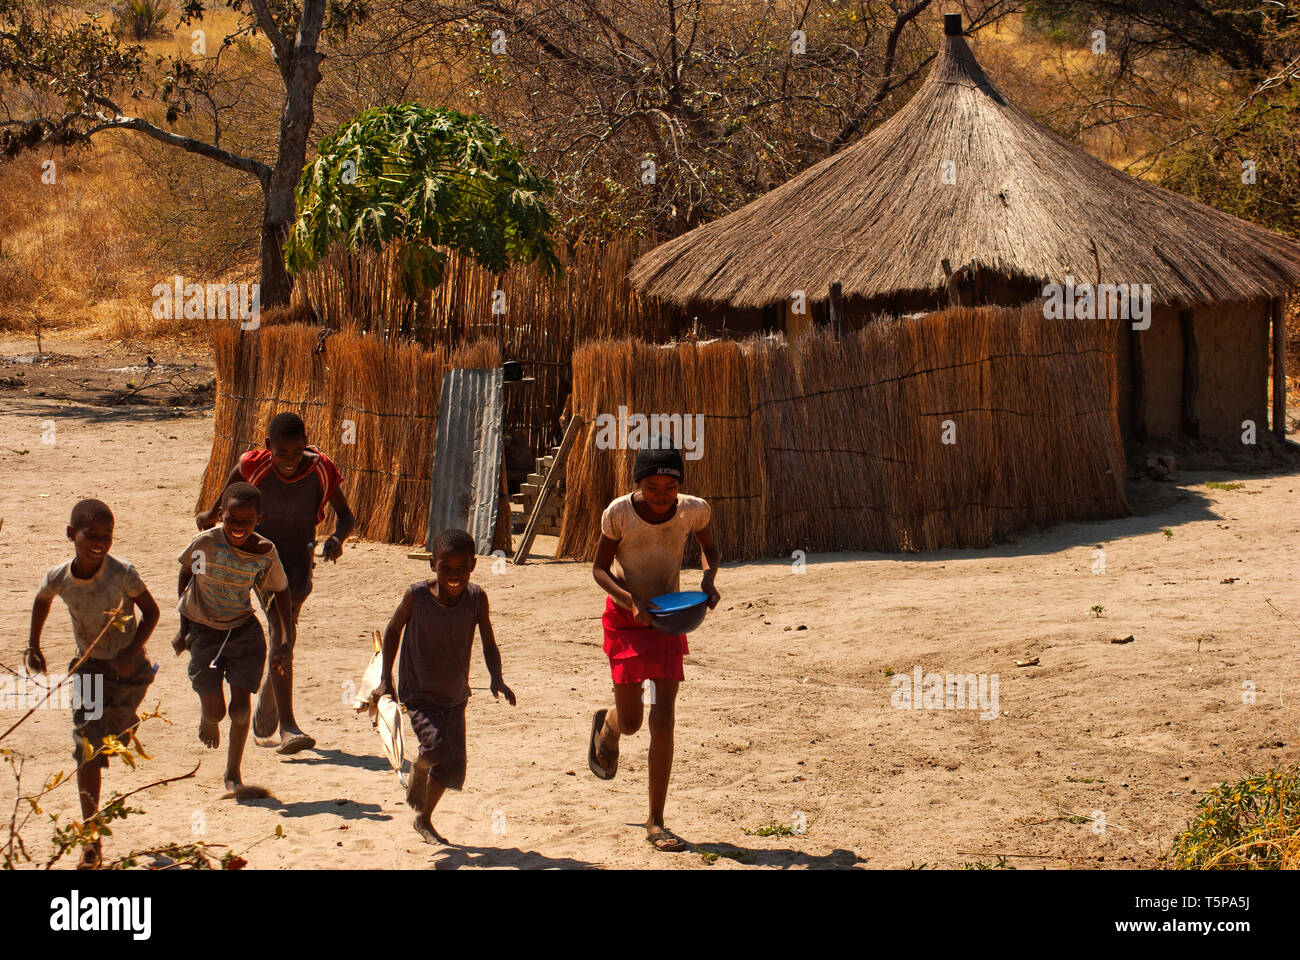 Young boys and girls running in front of their traditional grass hut, Caprivi Strip, Namibia Stock Photo